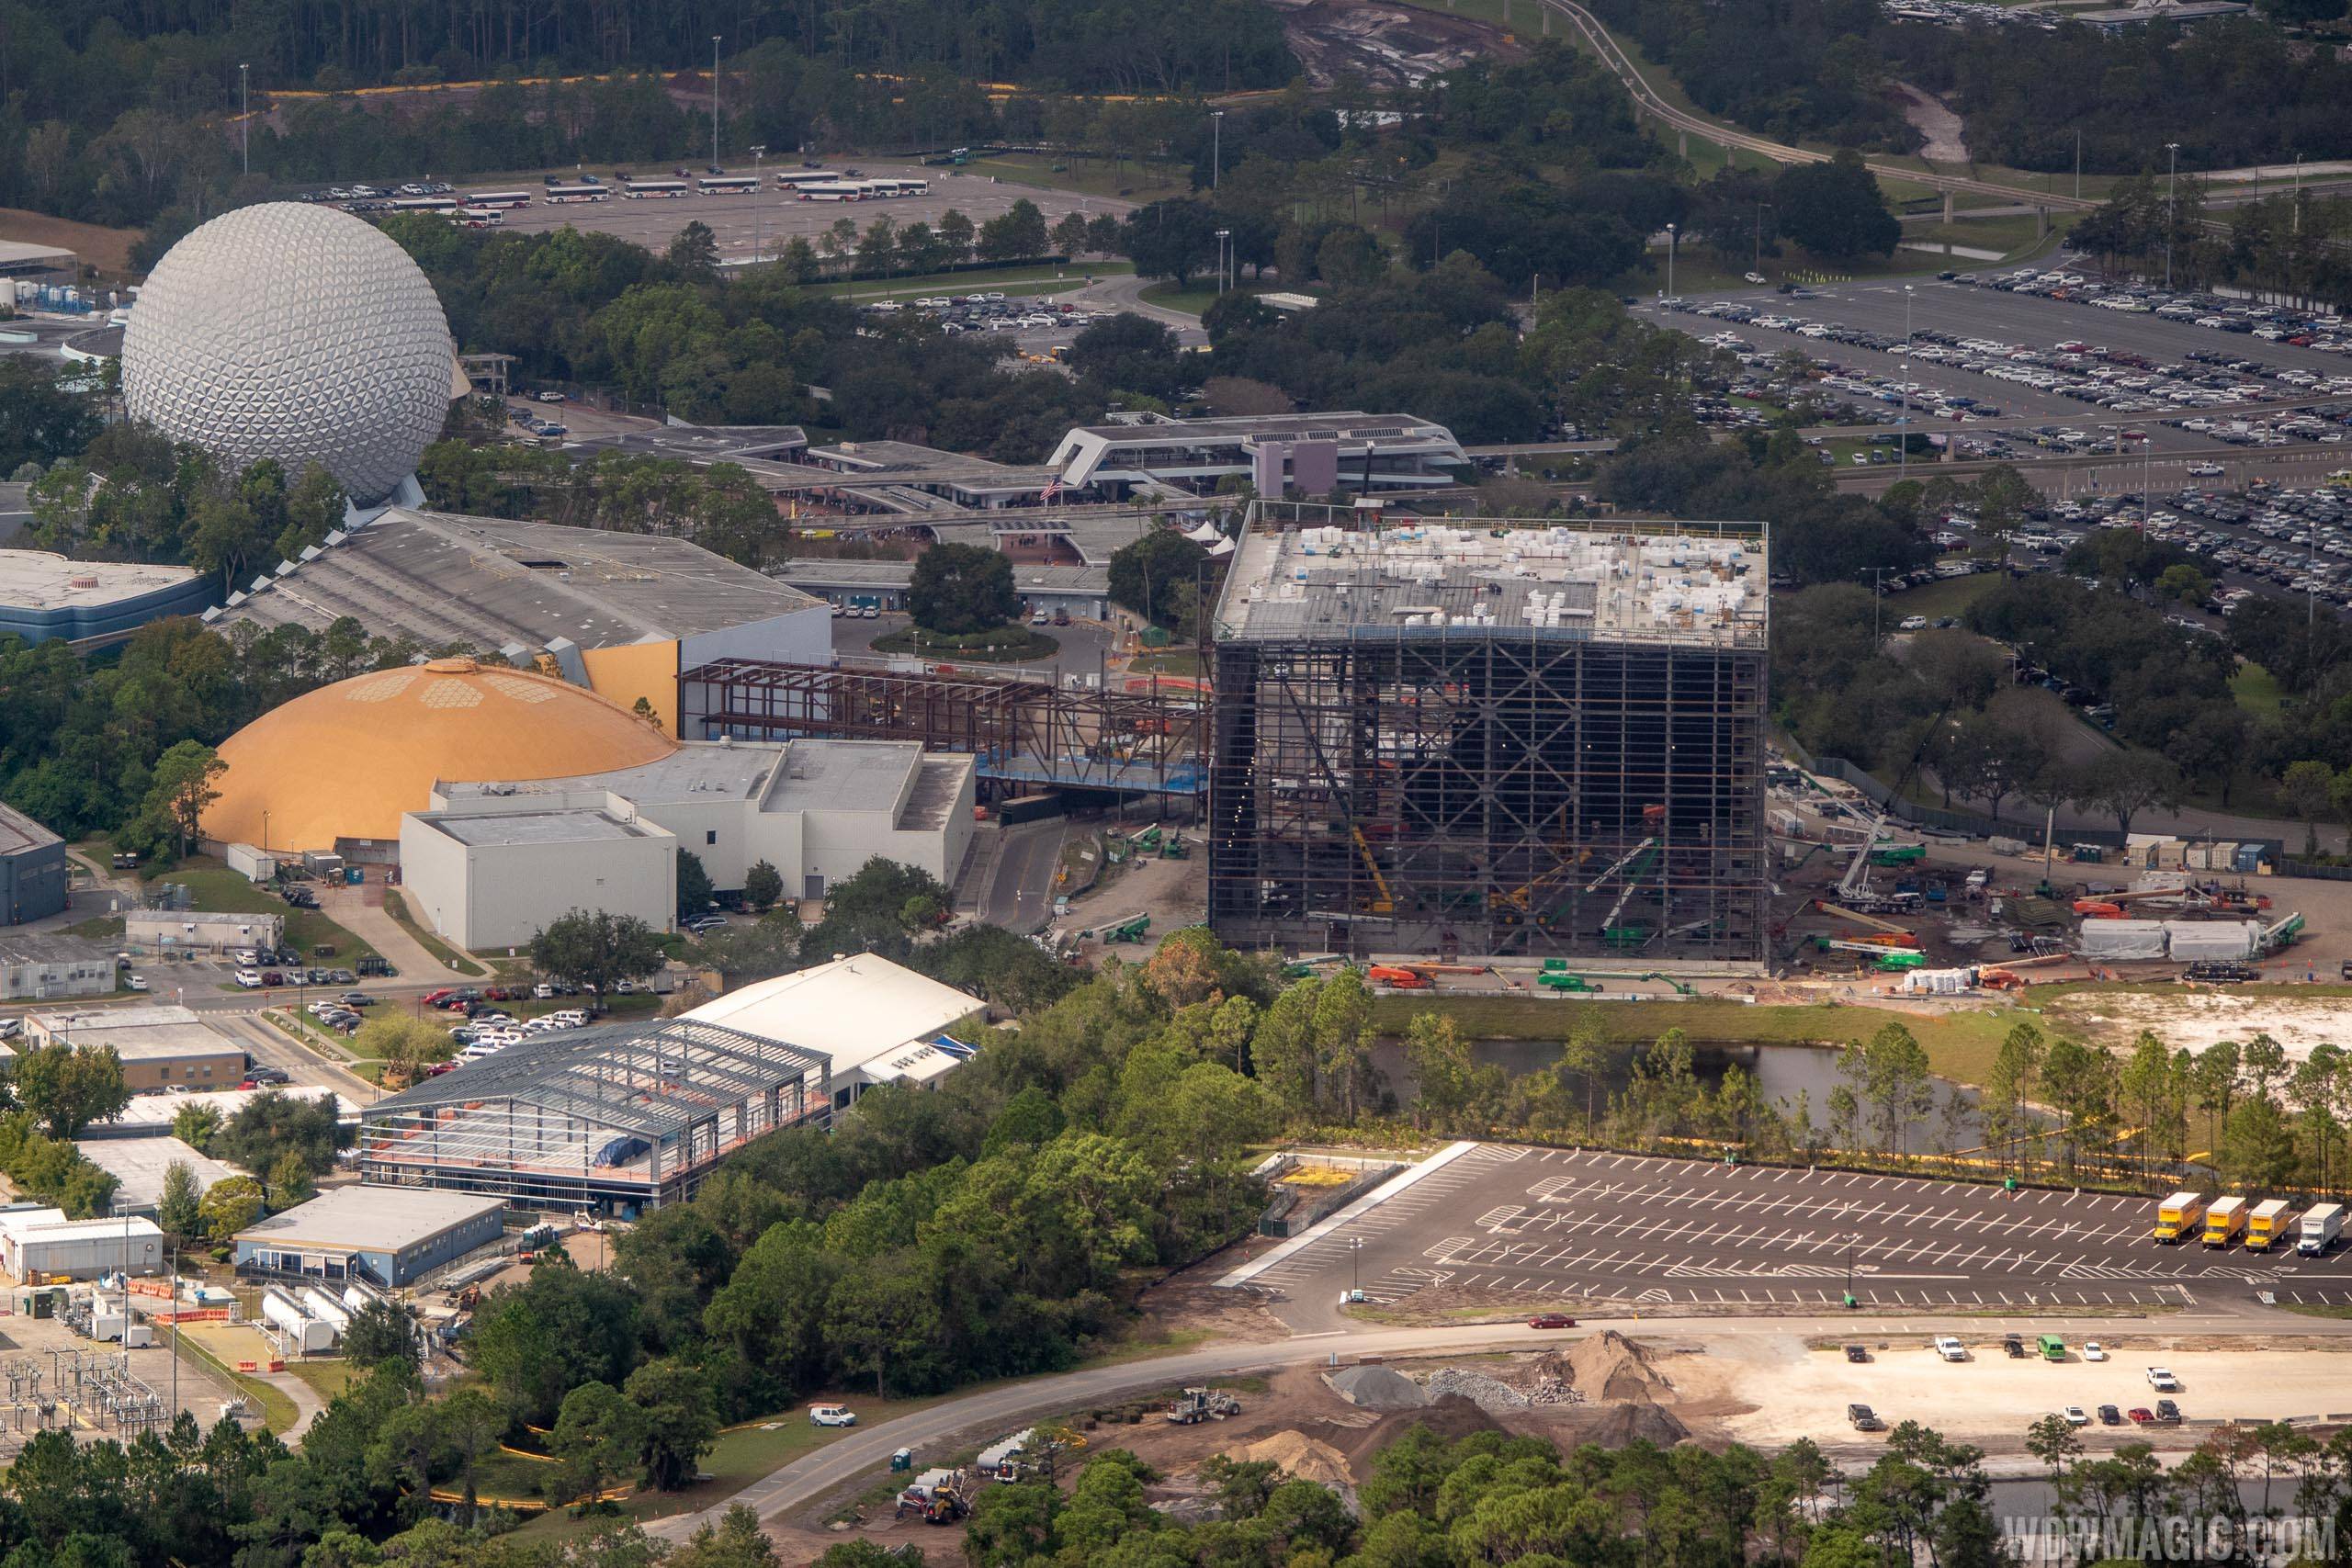 PHOTOS - Guardians of the Galaxy construction update at Epcot